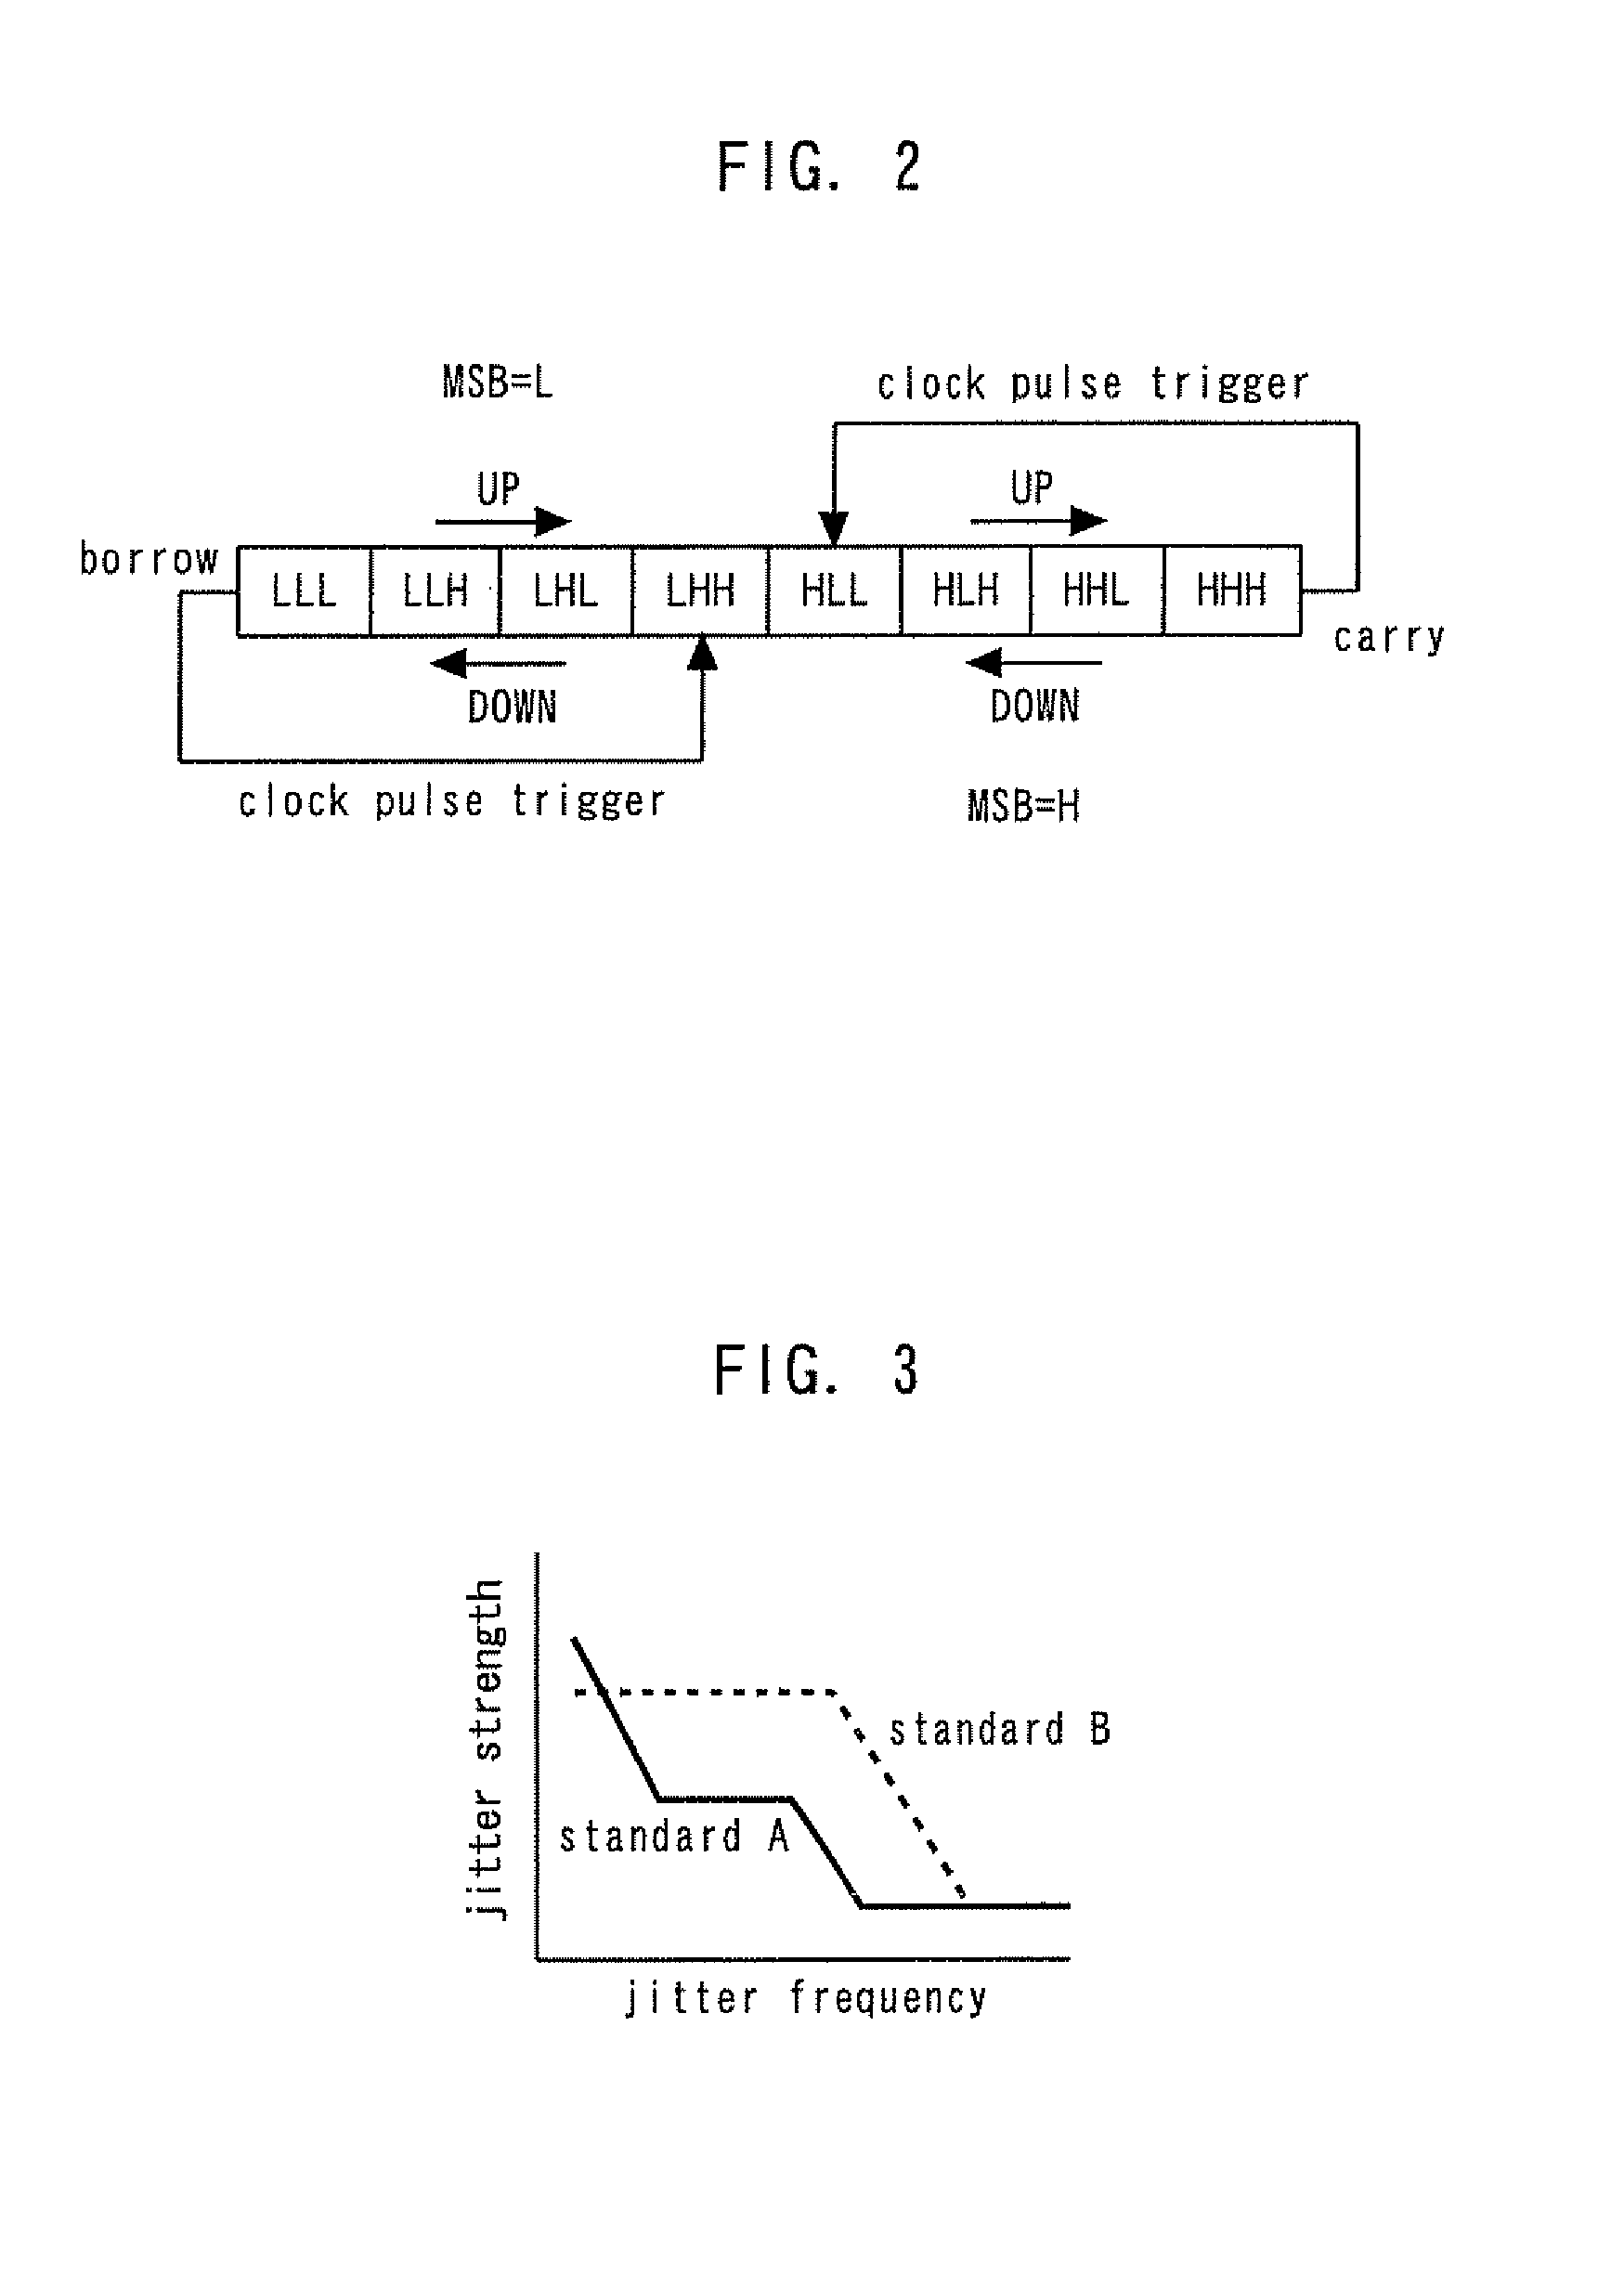 Digital-control-type phase-composing circuit system